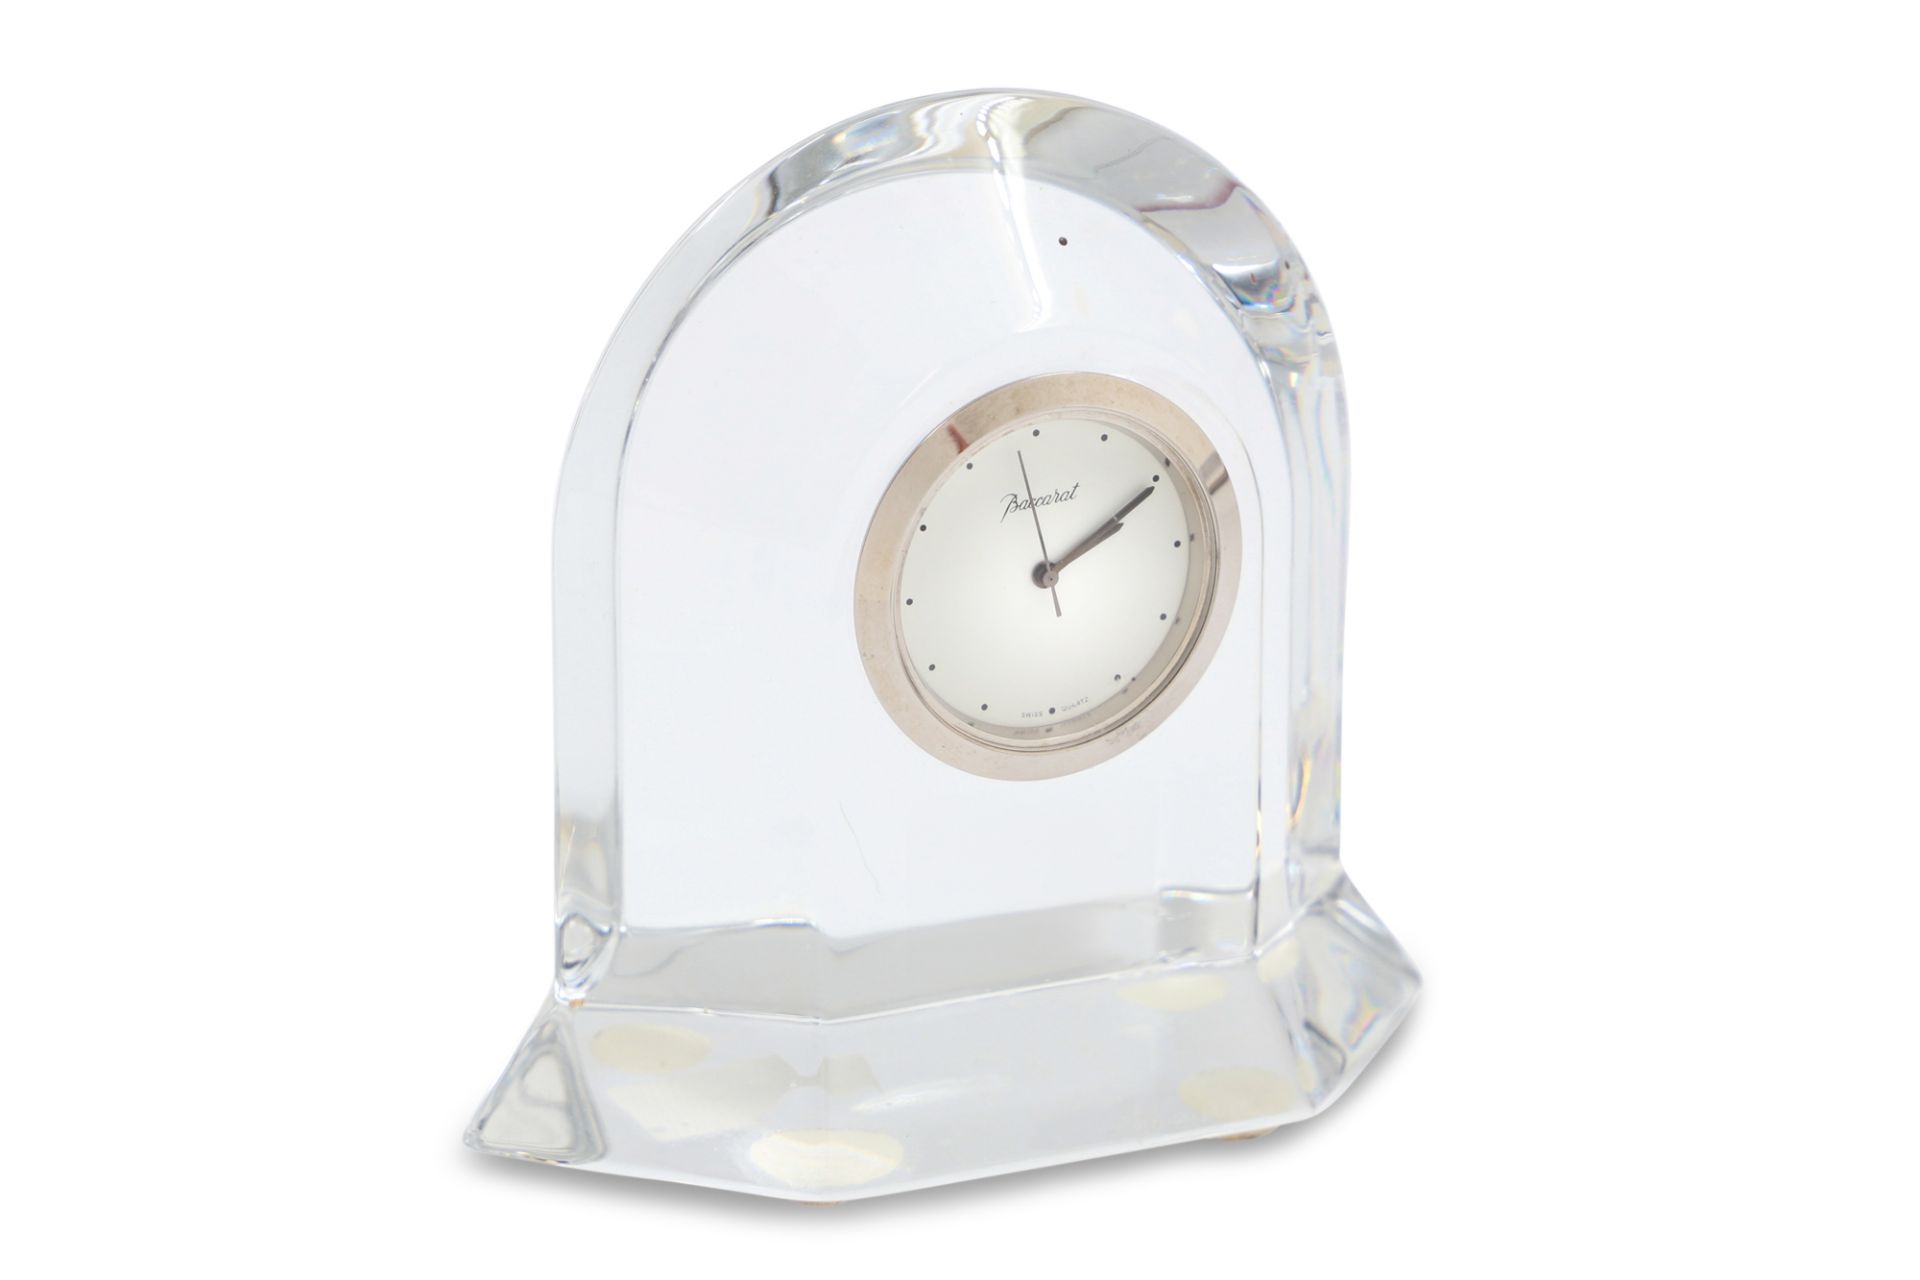 A BOXED MODERN "BACCARAT" CRYSTAL DESK CLOCK, box & papers